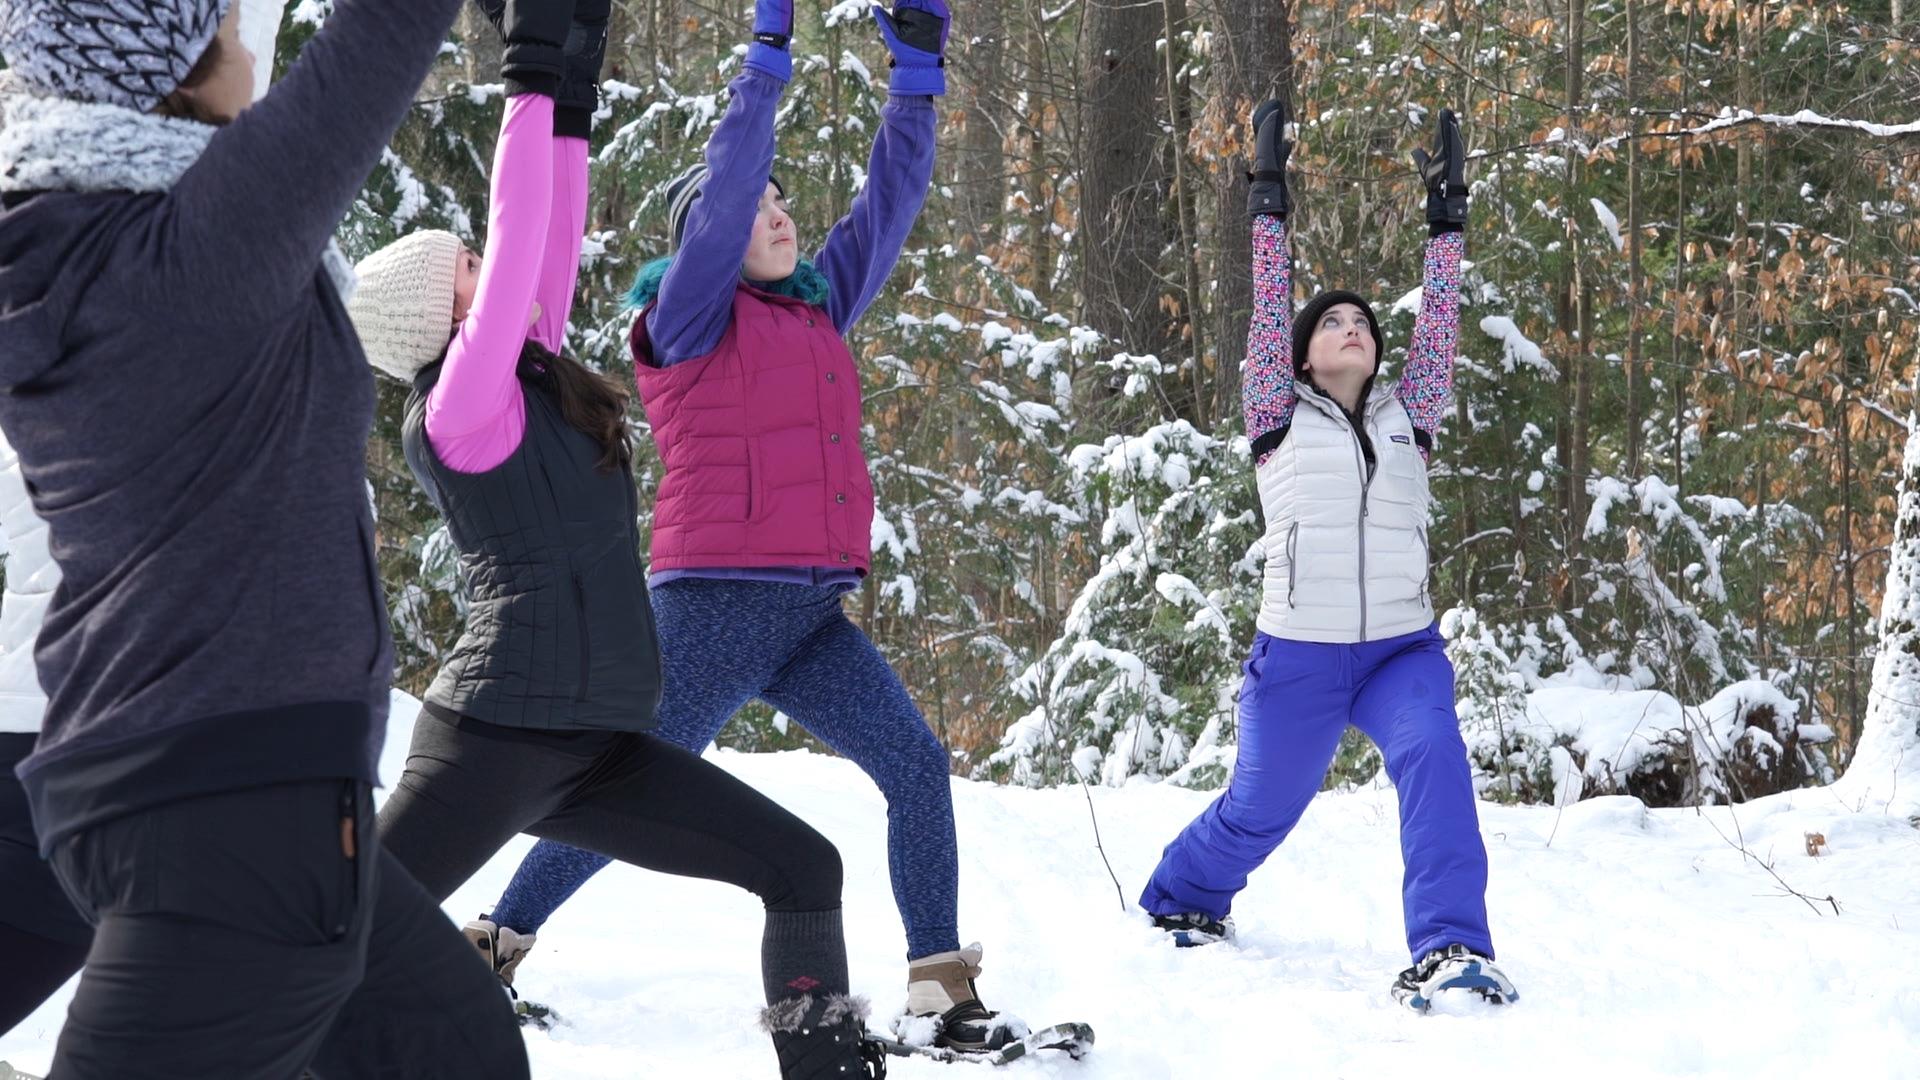 A yoga routine for snowshoe enthusiasts